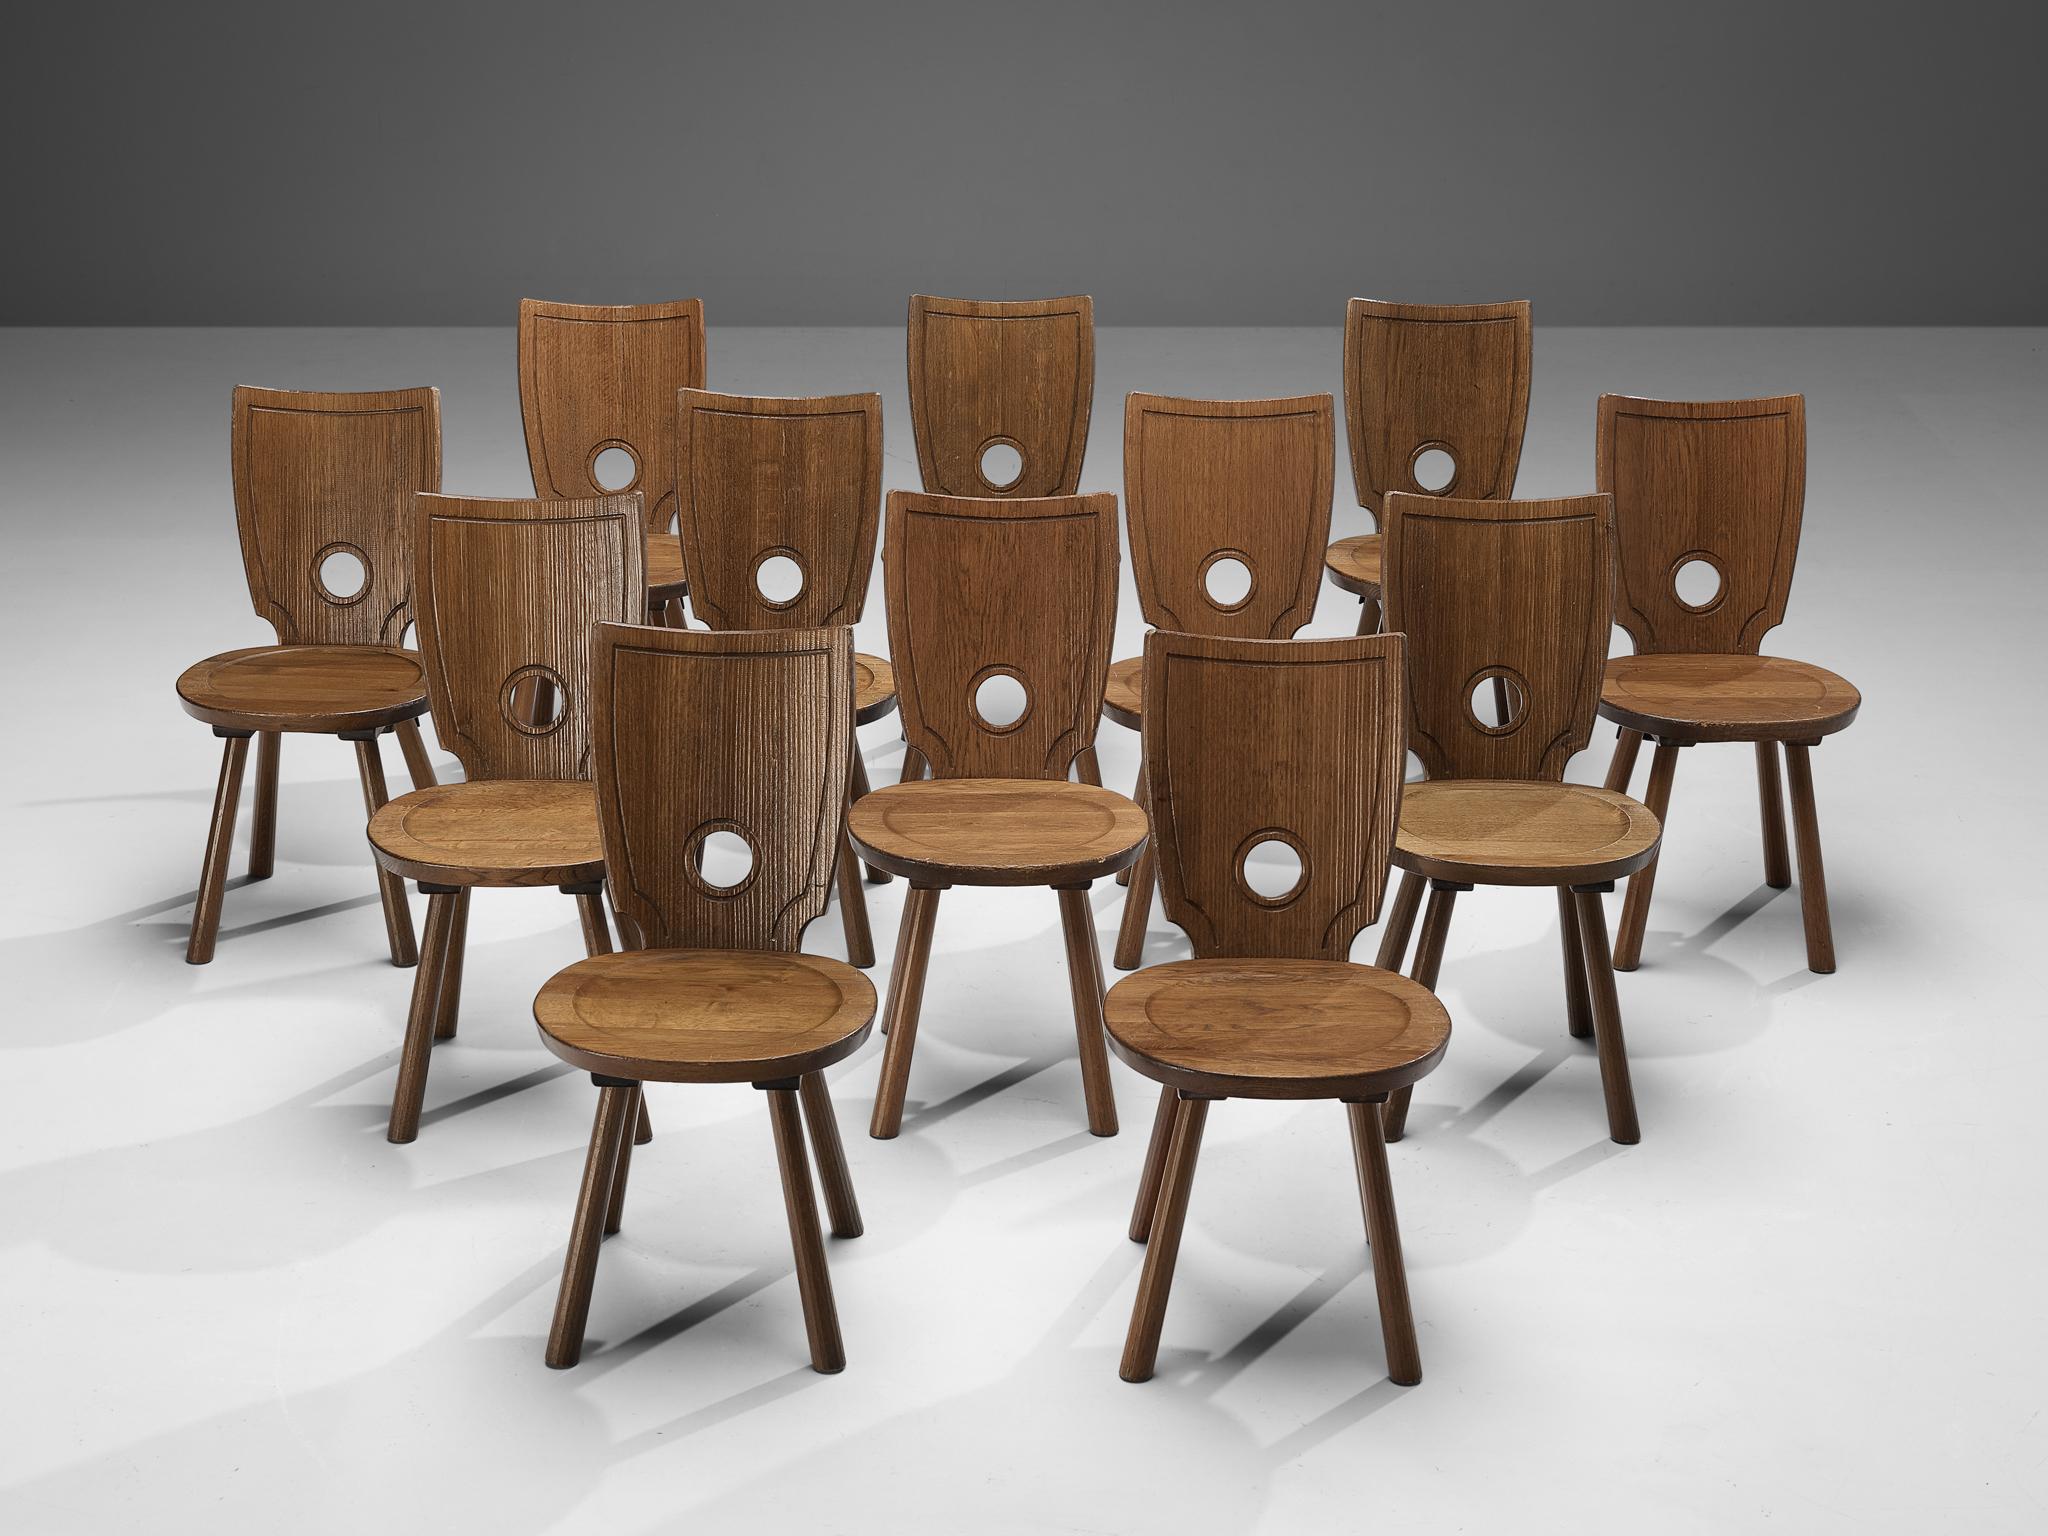 Set of twelve dining chairs, stained oak, brass, metal, France, 1960s

Characteristic set of French dining chairs. In absence of decoration, the rounded gap in the backrest gets an important visual role as it contrasts with the sharp, angular